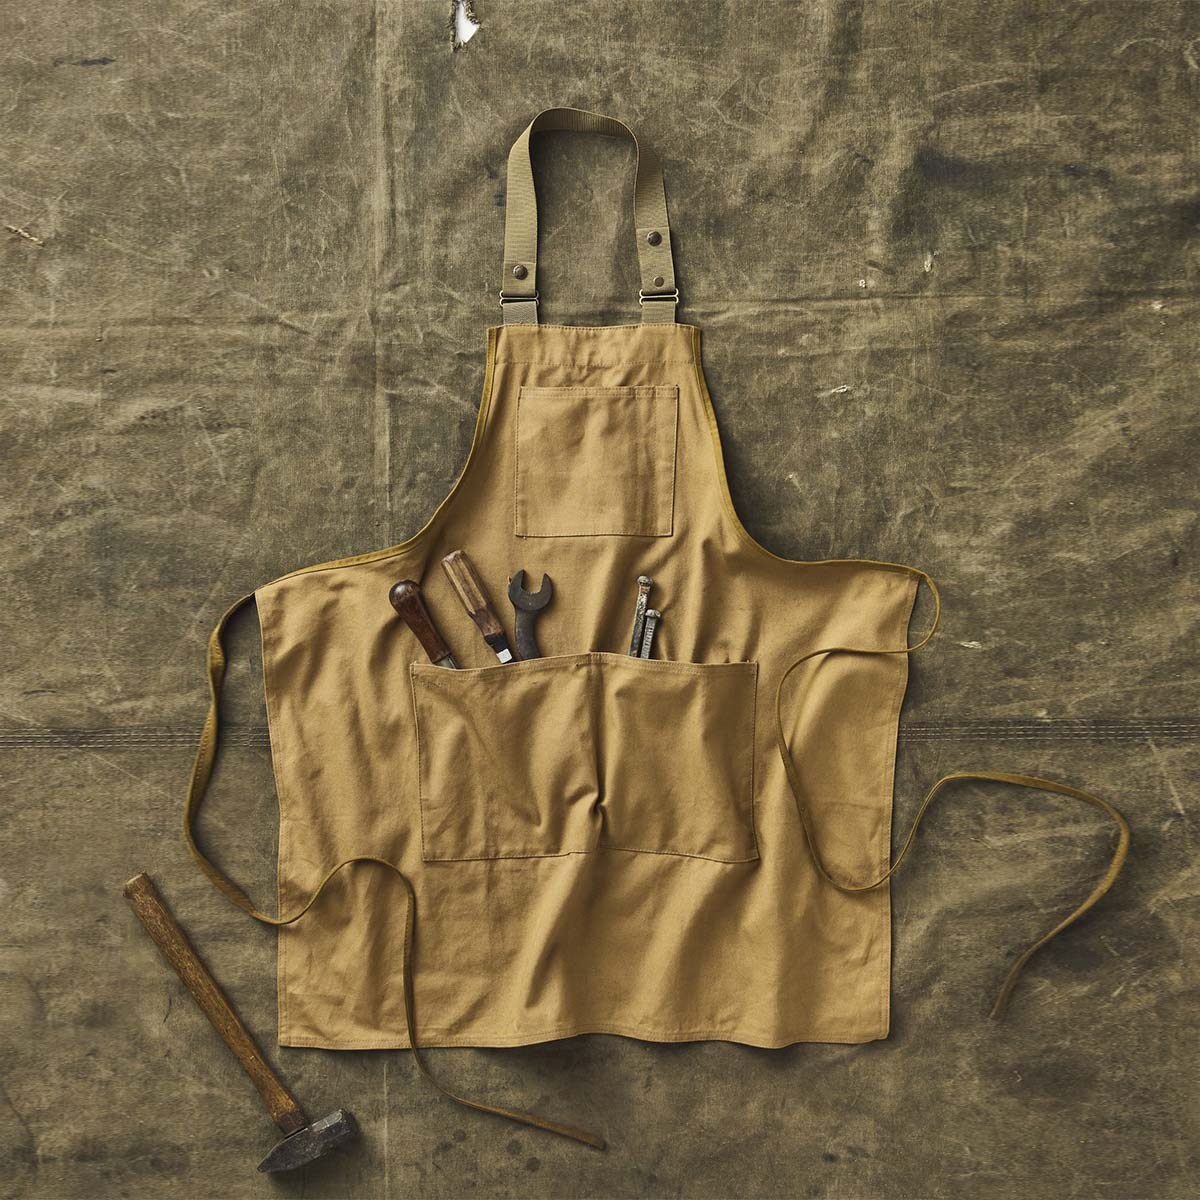 Filson Tin Cloth Apron Dark Tan, a cool apron to protect your clothes and have tools at hand